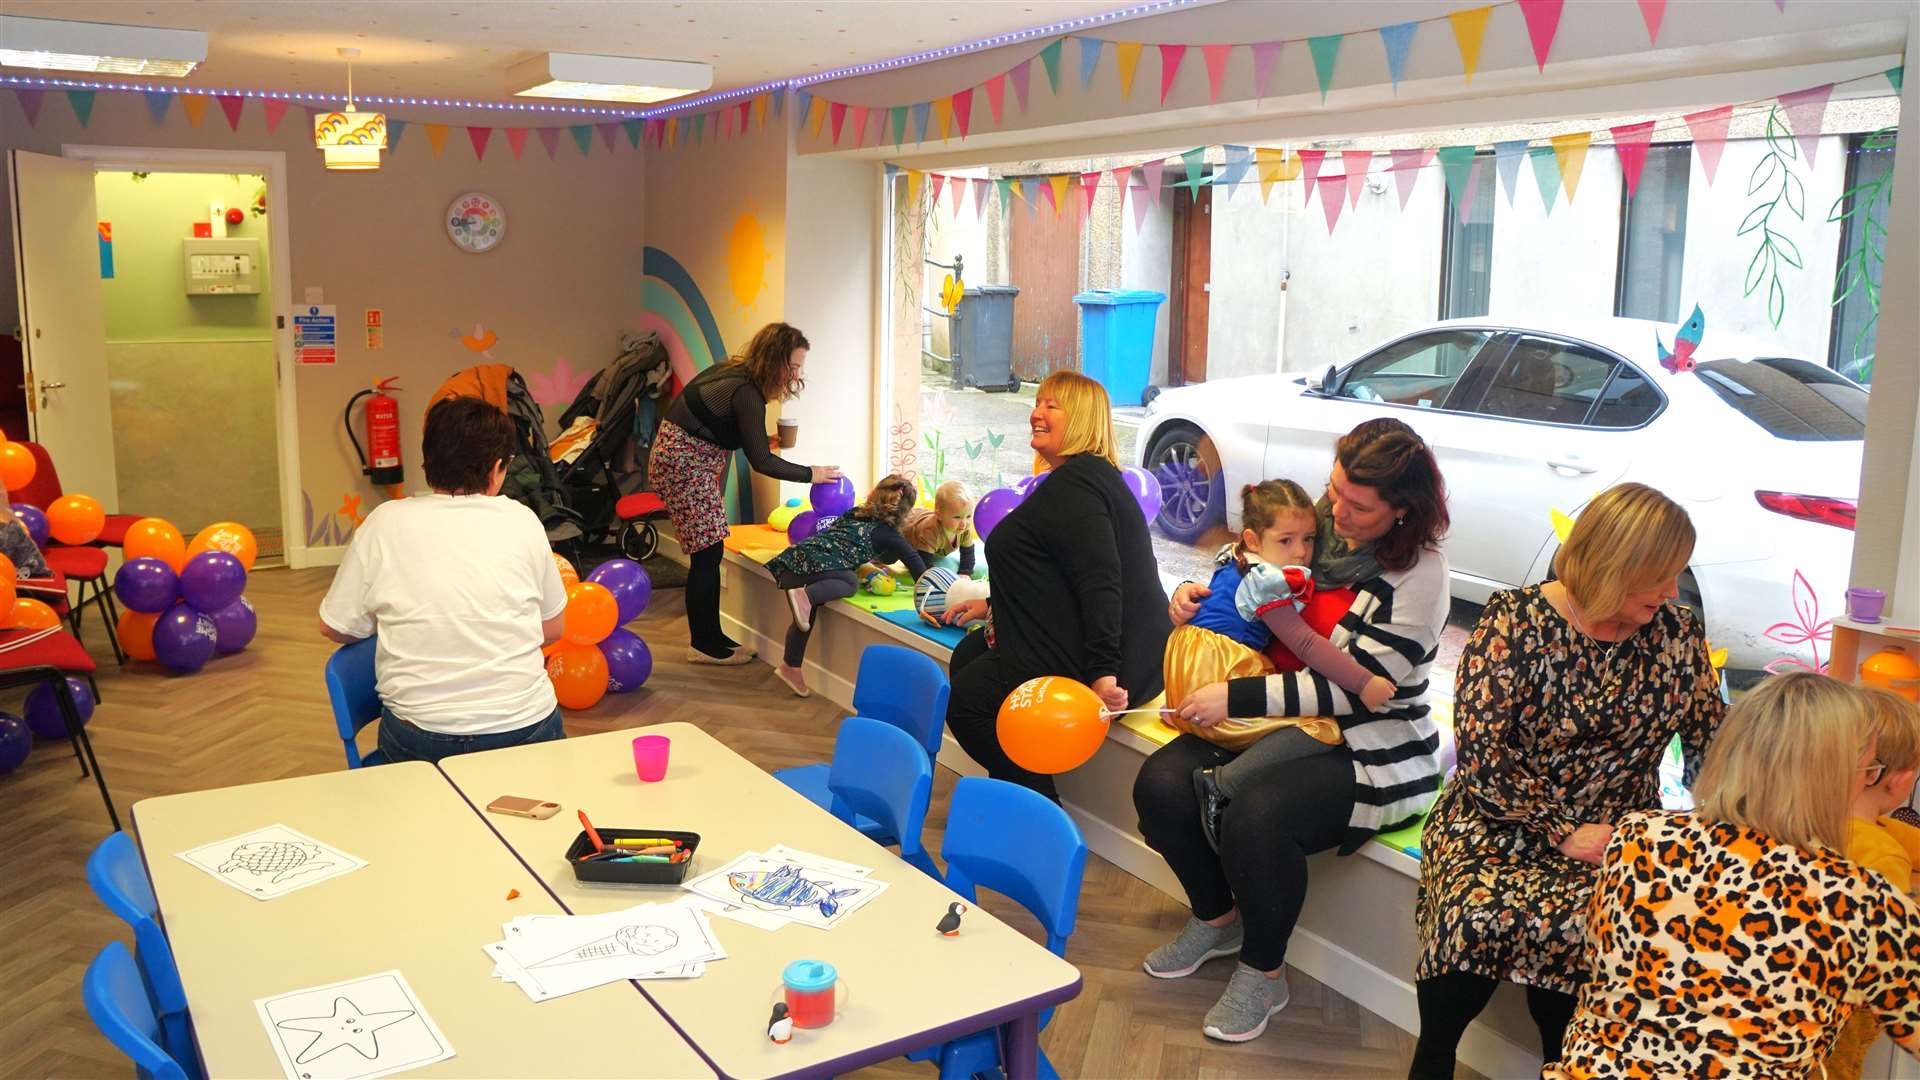 Home-Start's new base in Wick was filled with the cheery sounds of children playing at the open day event. Picture: DGS